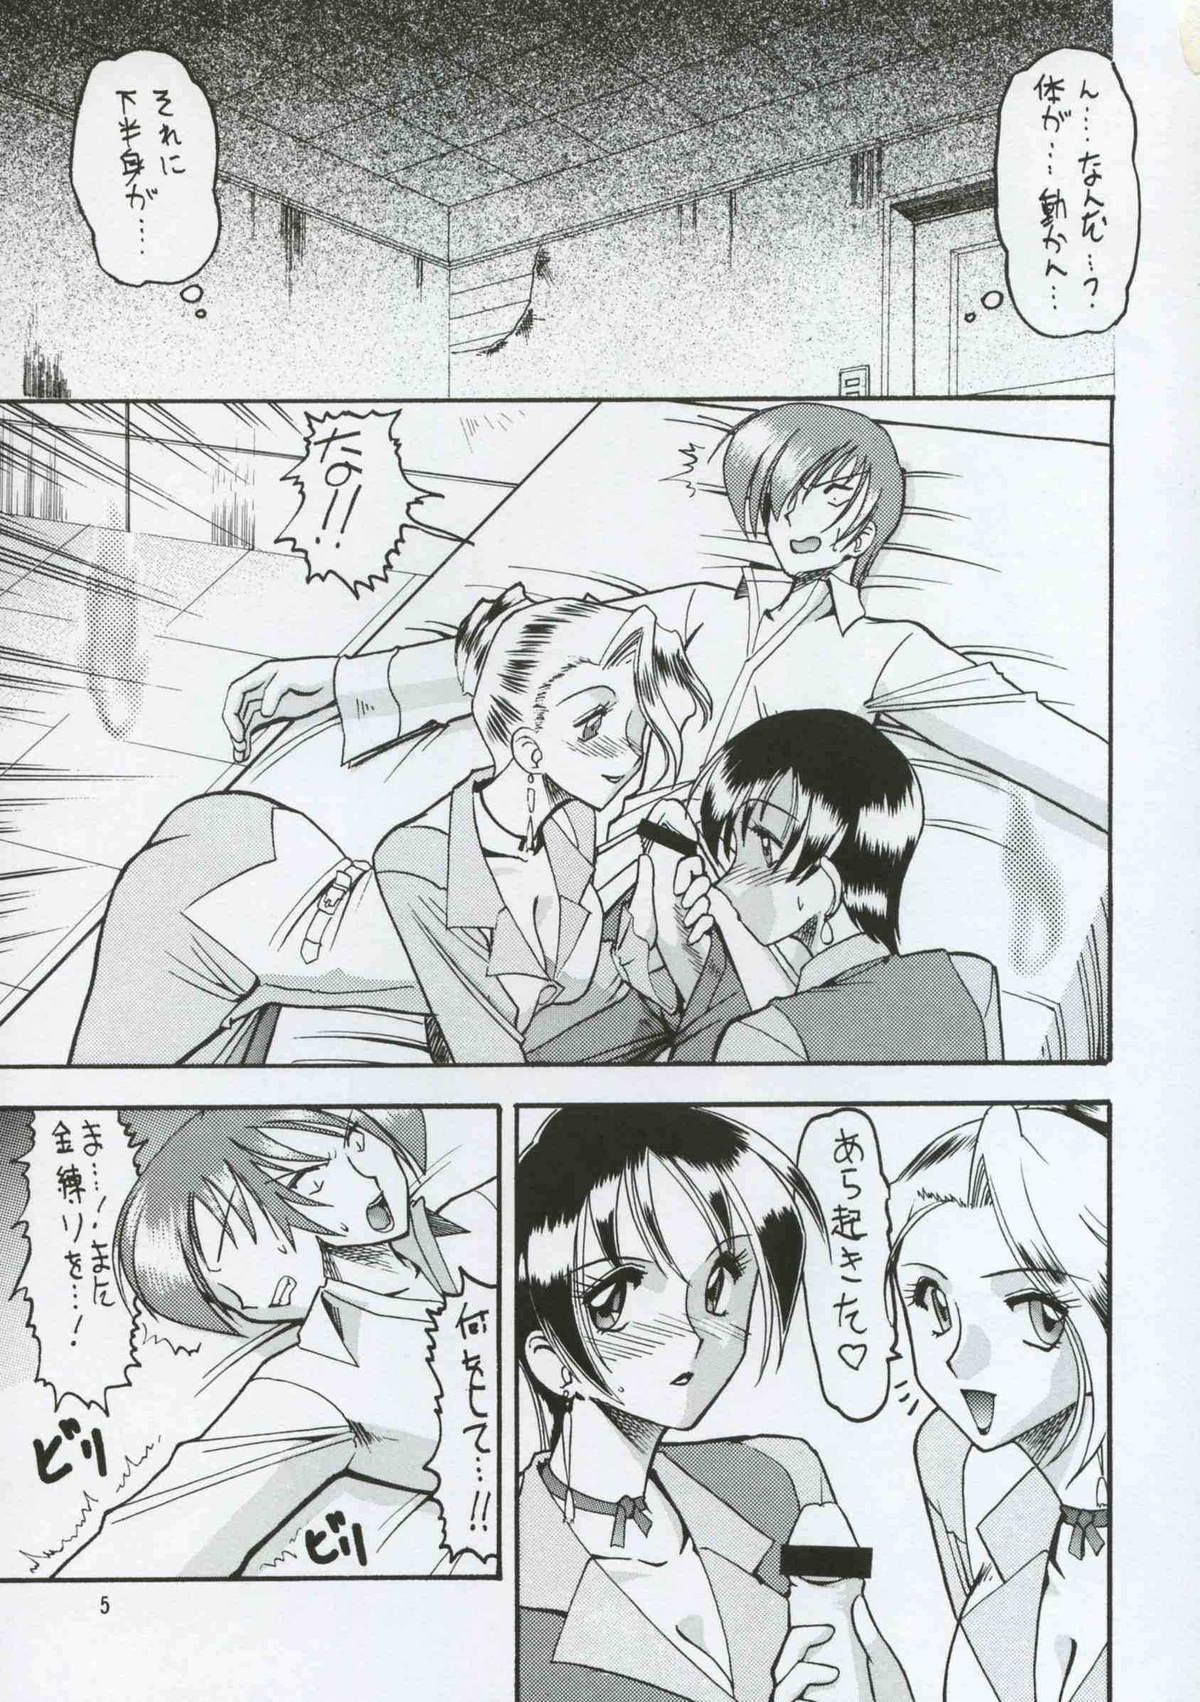 Lesbos SEMEDAIN G WORKS vol.8 - Orochijo - King of fighters Gay Big Cock - Page 4